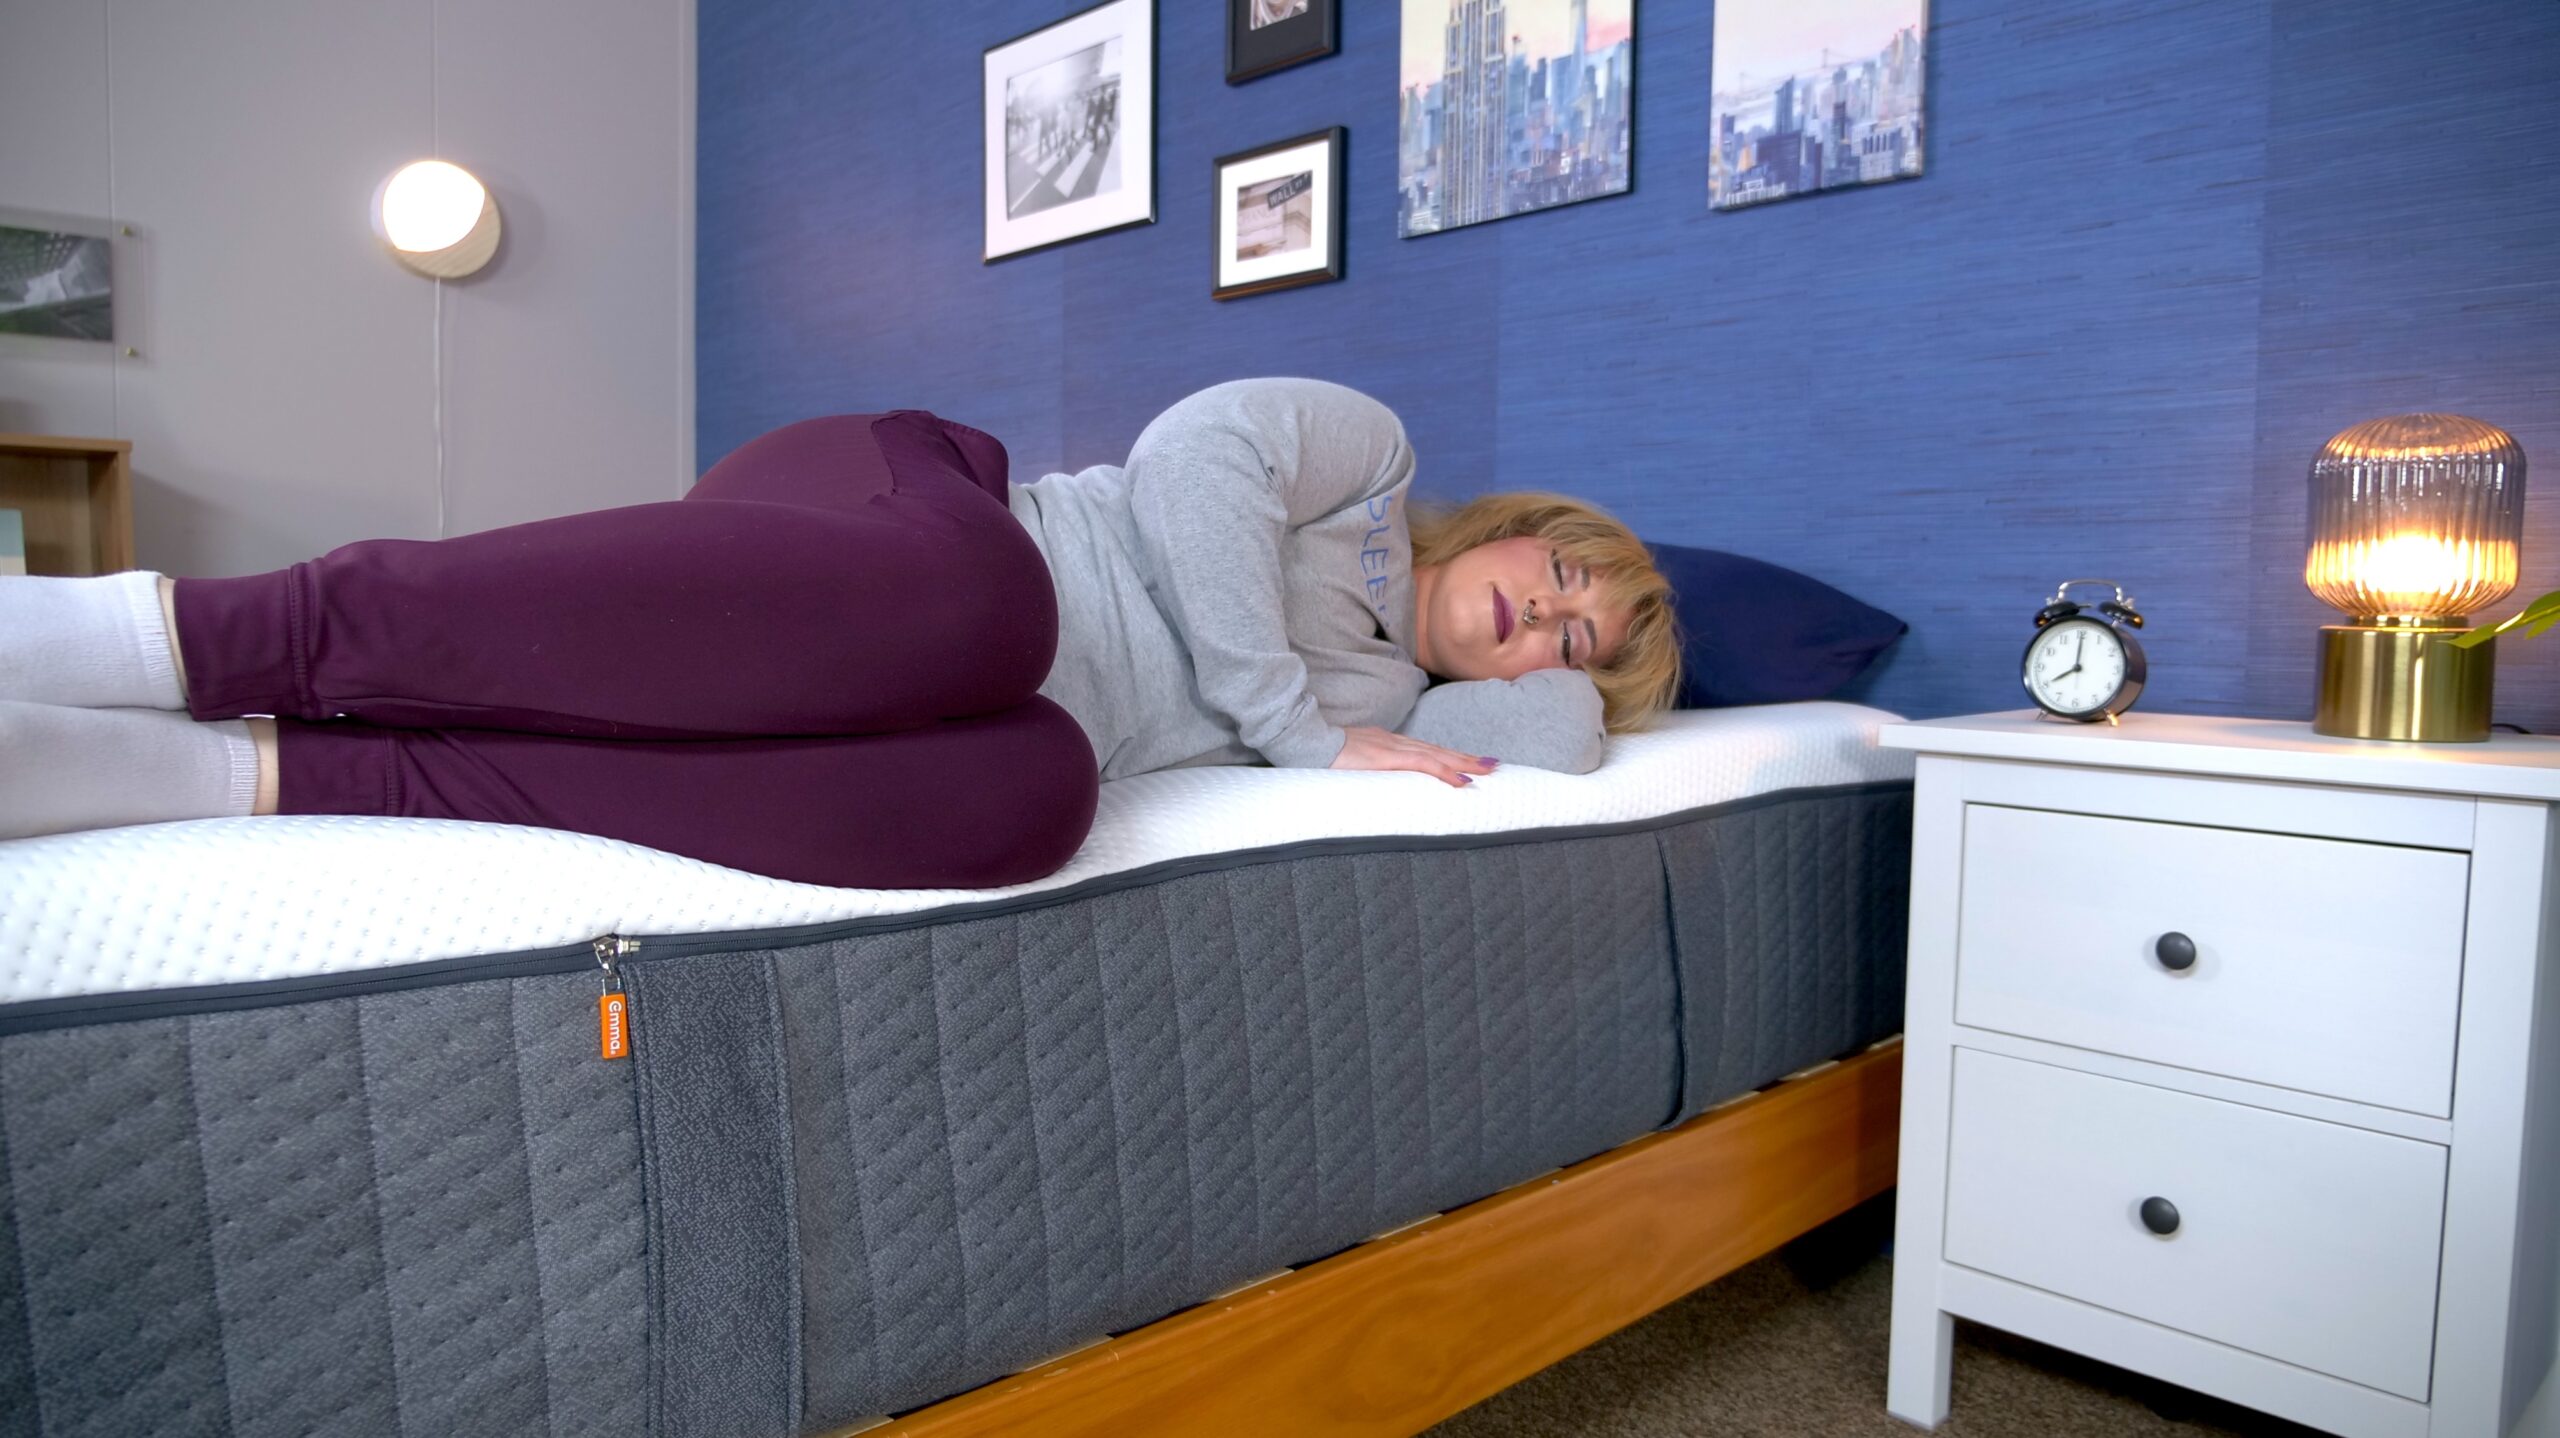 Nichole testing the edge support on the Emma Hybrid Cooling Elite mattress